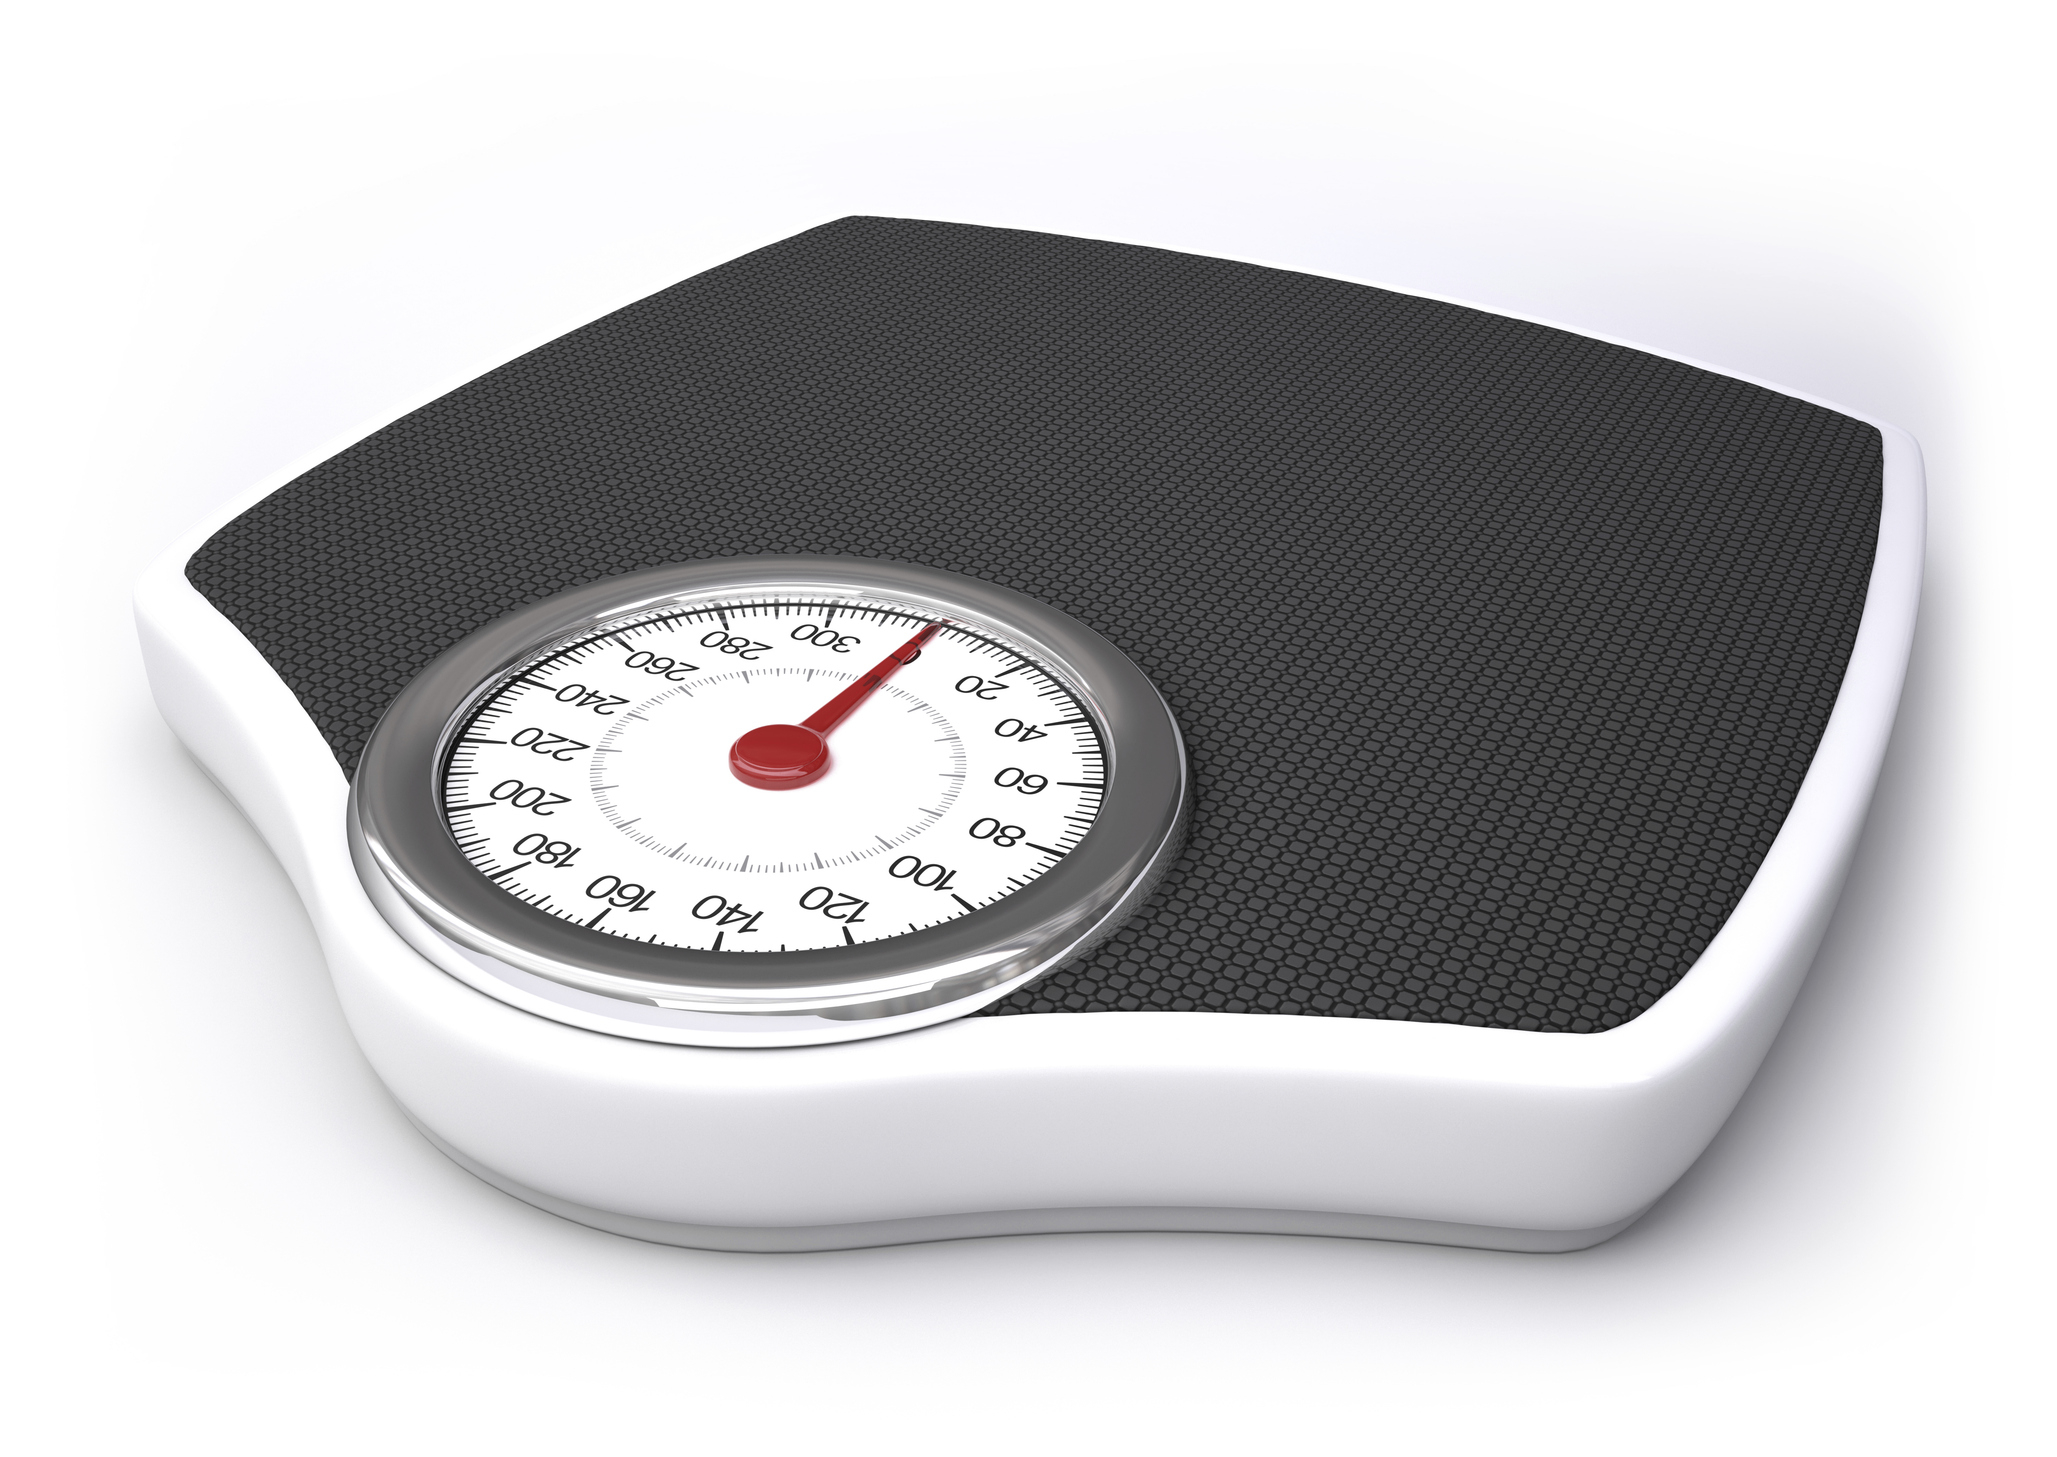 Traditional mechanical bathroom scale with a round dial